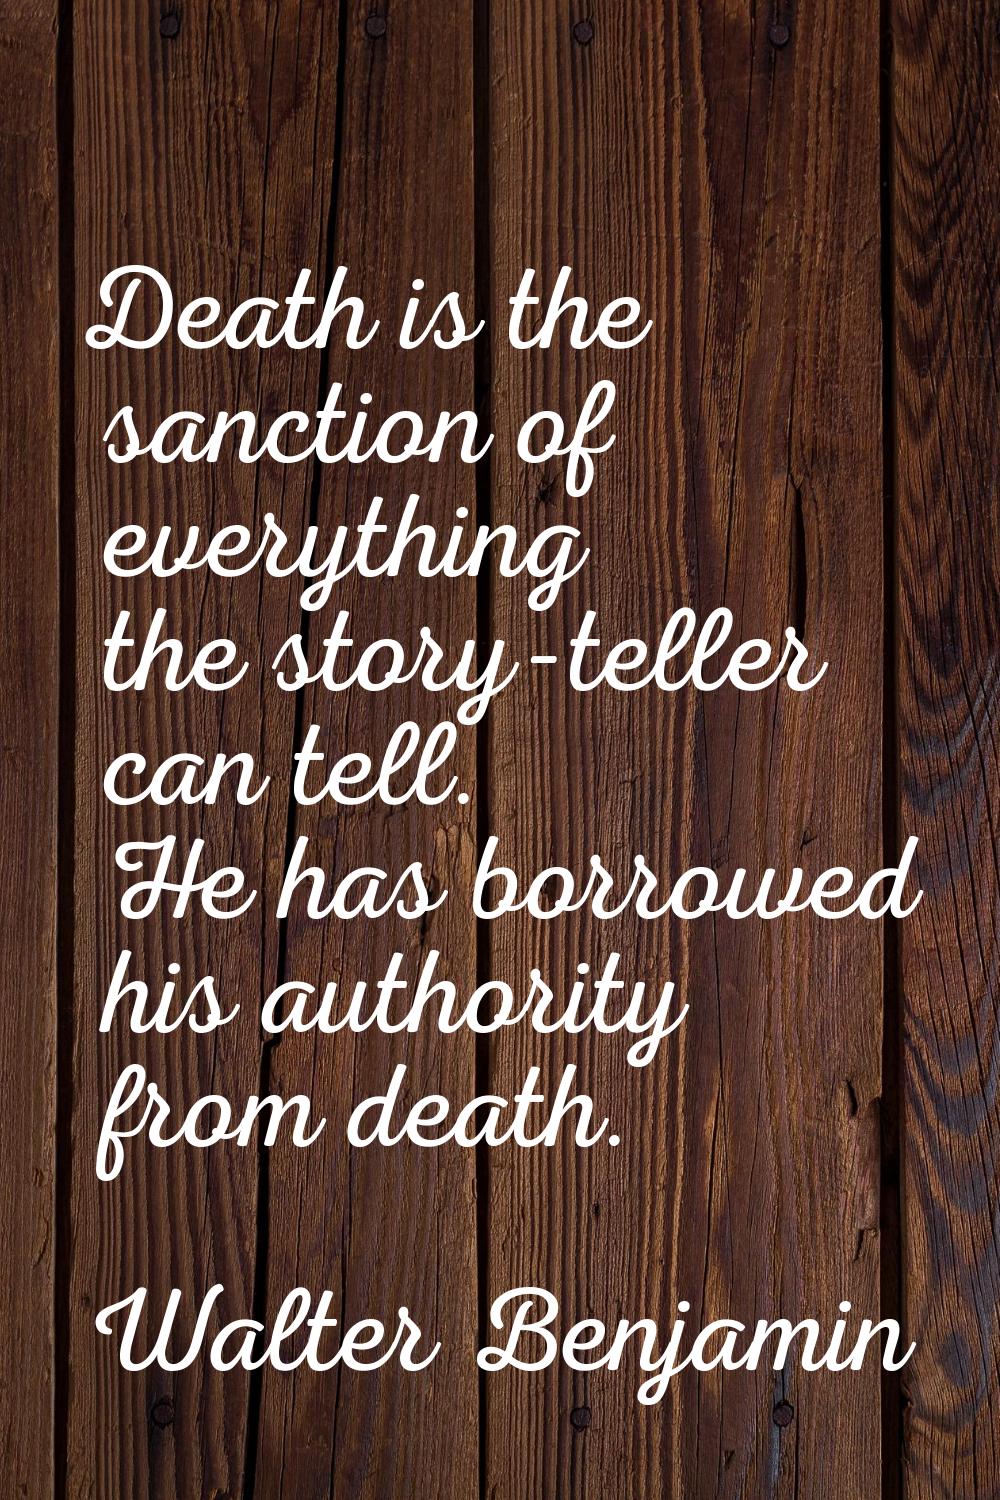 Death is the sanction of everything the story-teller can tell. He has borrowed his authority from d